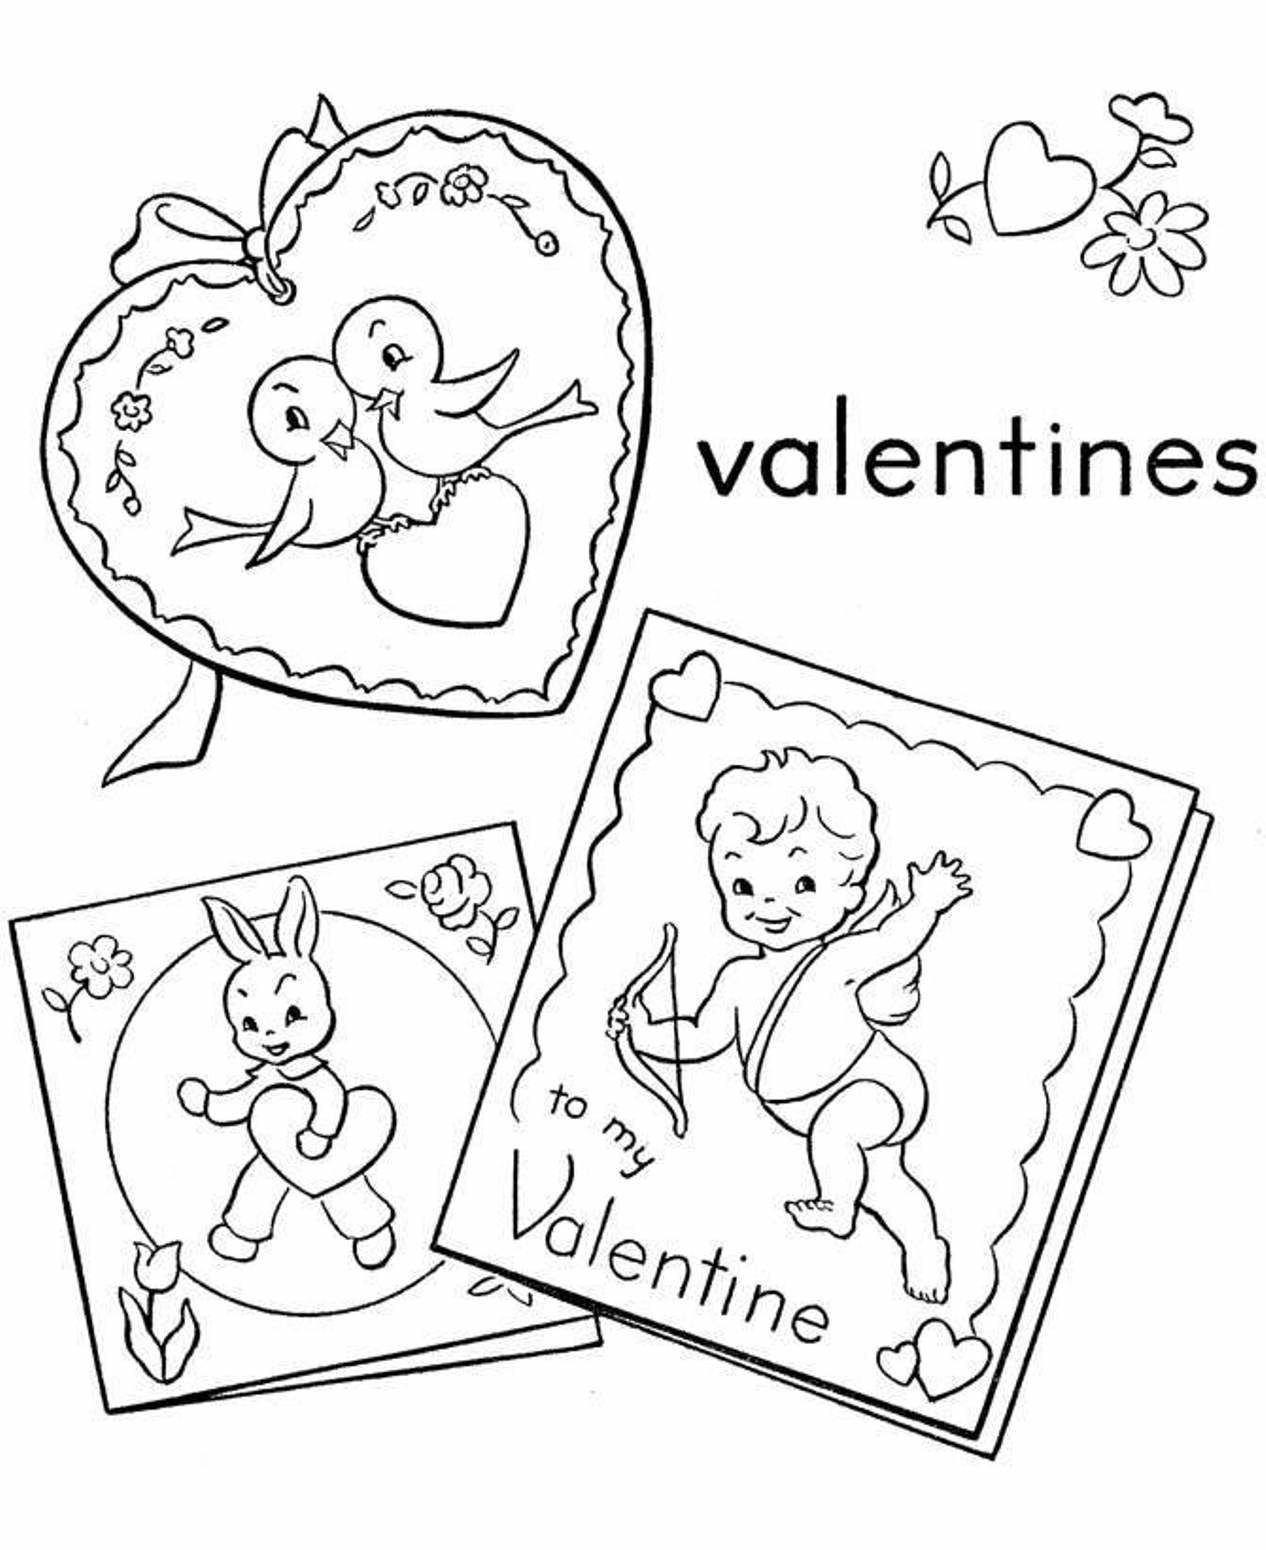 Get Well Soon Coloring Pages For Adults Free Get Well Coloring ...